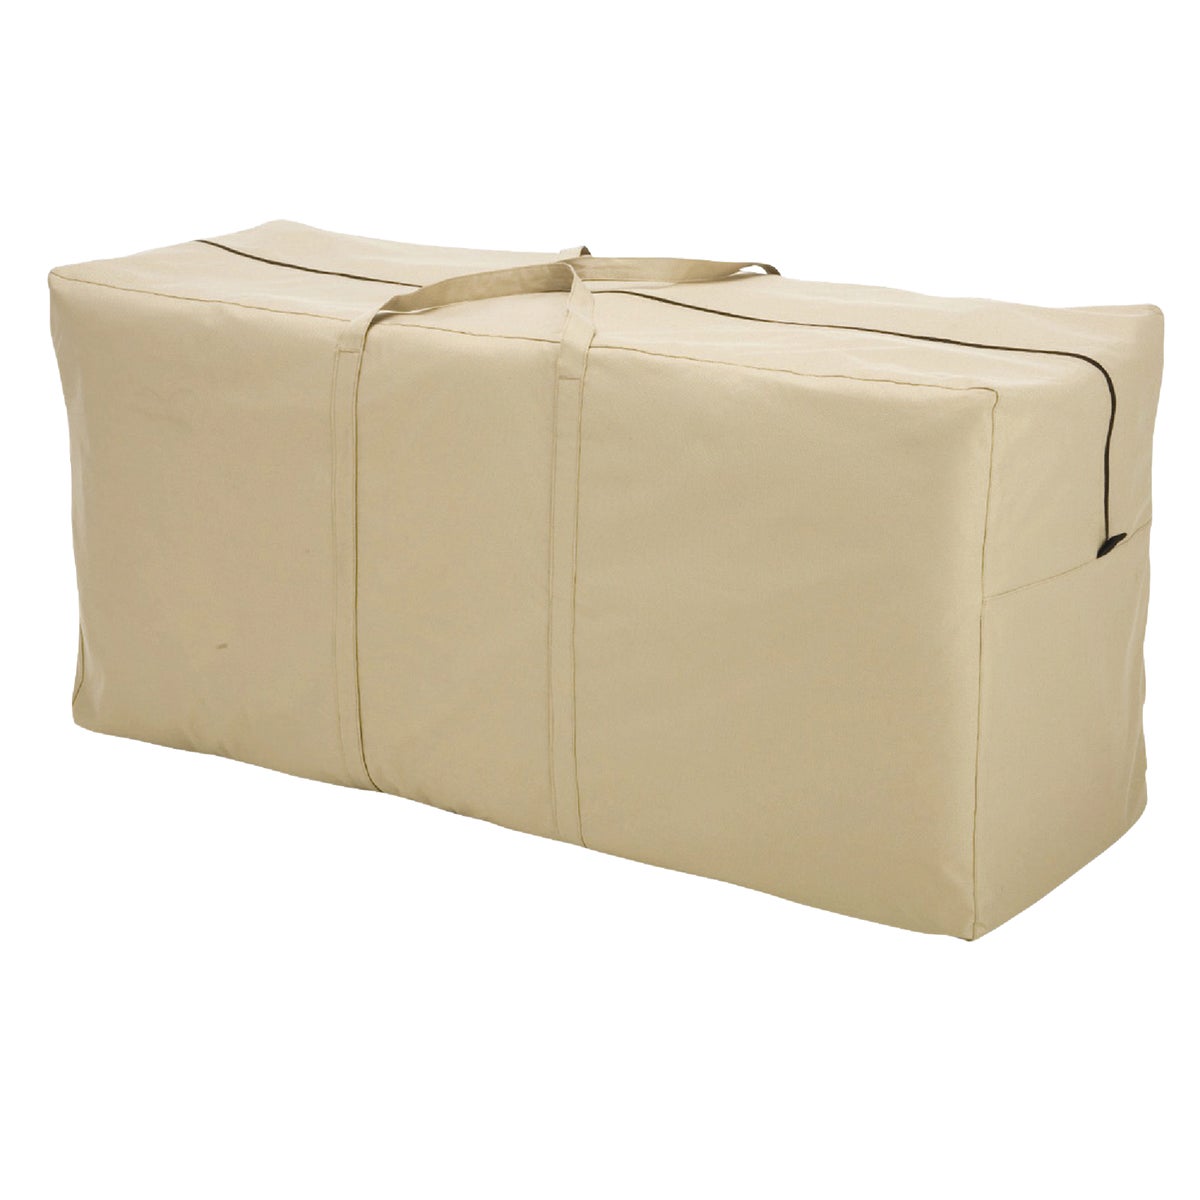 Item 817753, Patio cushion and cover storage bag.